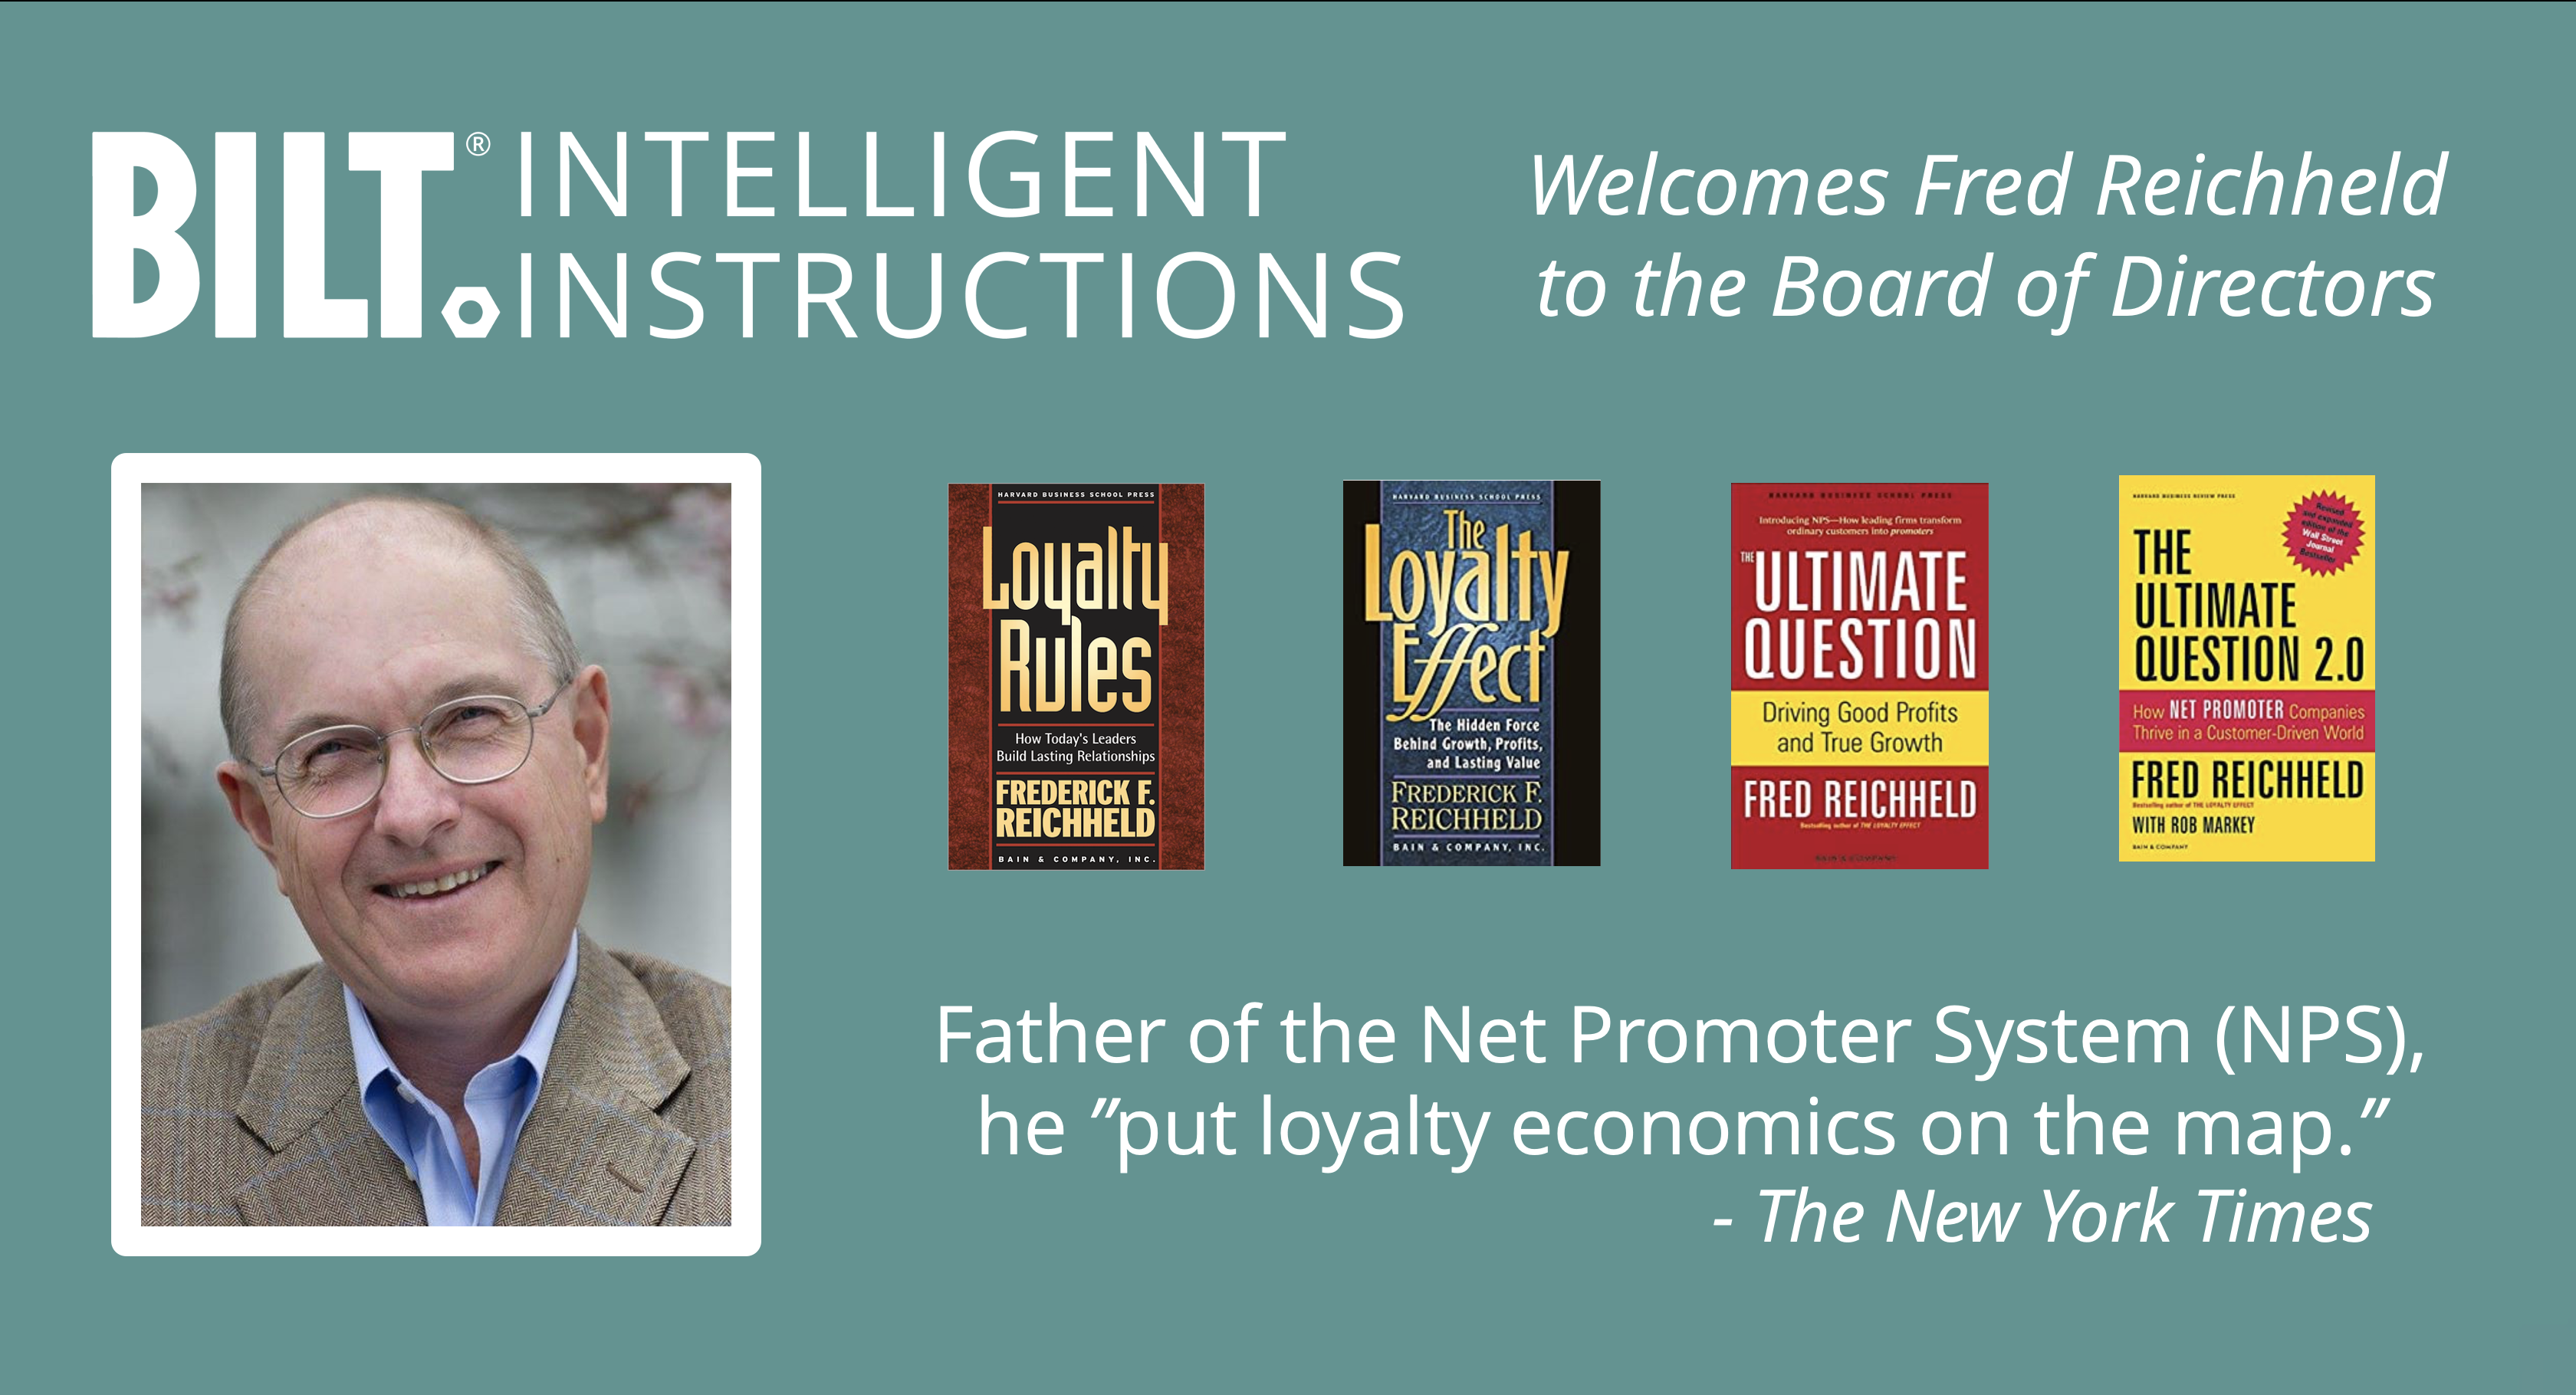 Father of Net Promoter System to Join BILT Board of Directors: Identifies 3D Instruction App as Game-Changing "Booster Rocket" for NPS